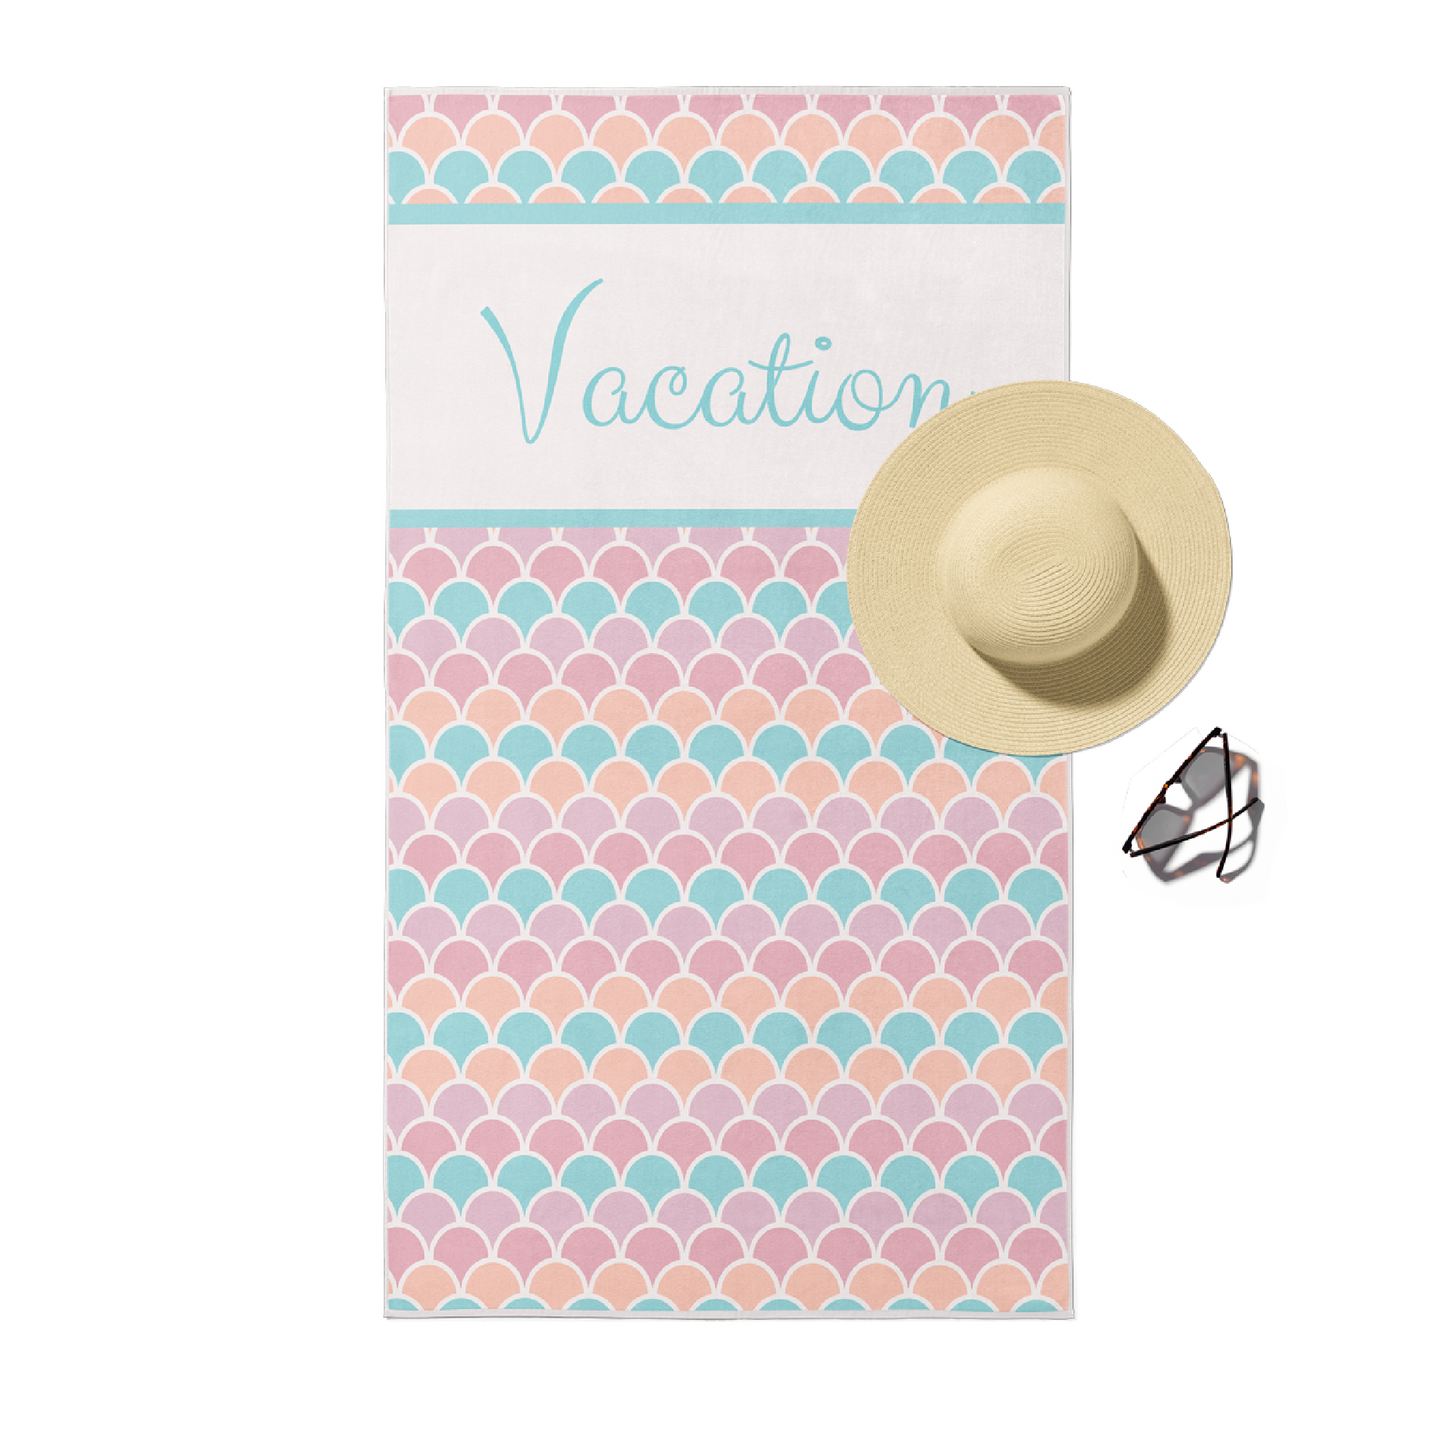 Beach towel in tropical summer pastel scales with customizable text.